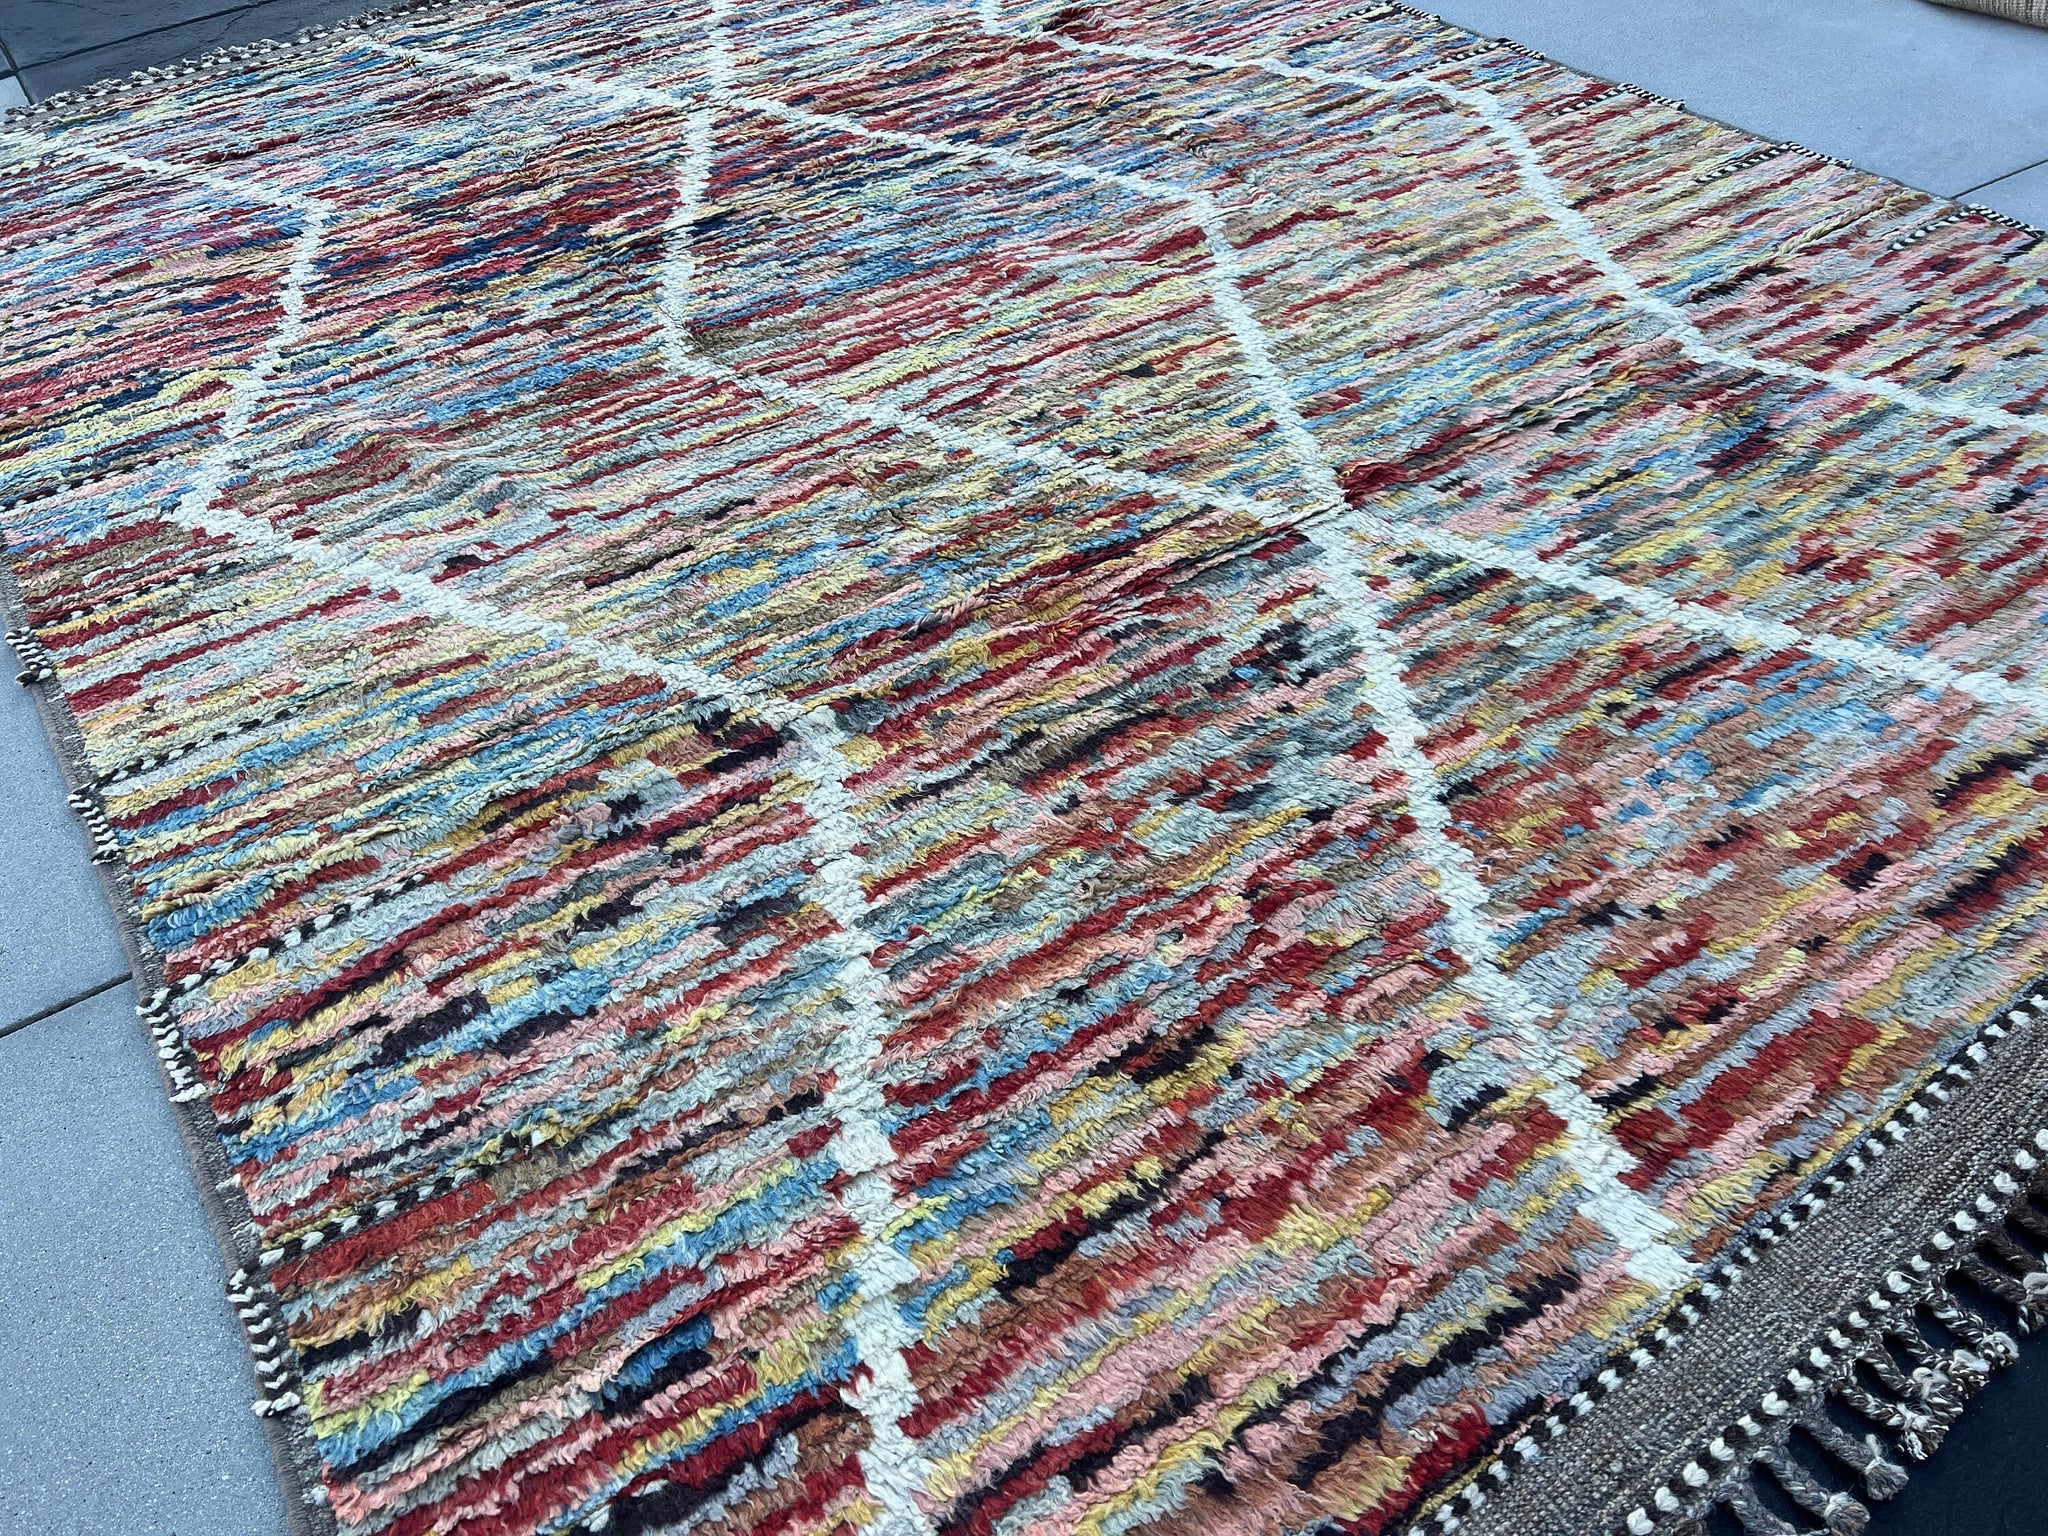 9x13 Handmade Afghan Moroccan Rug | Colorful Salmon Pink Blue Grey Yellow Ruby Red Brown White Olive Green | Berber Beni Plush Tufted Wool